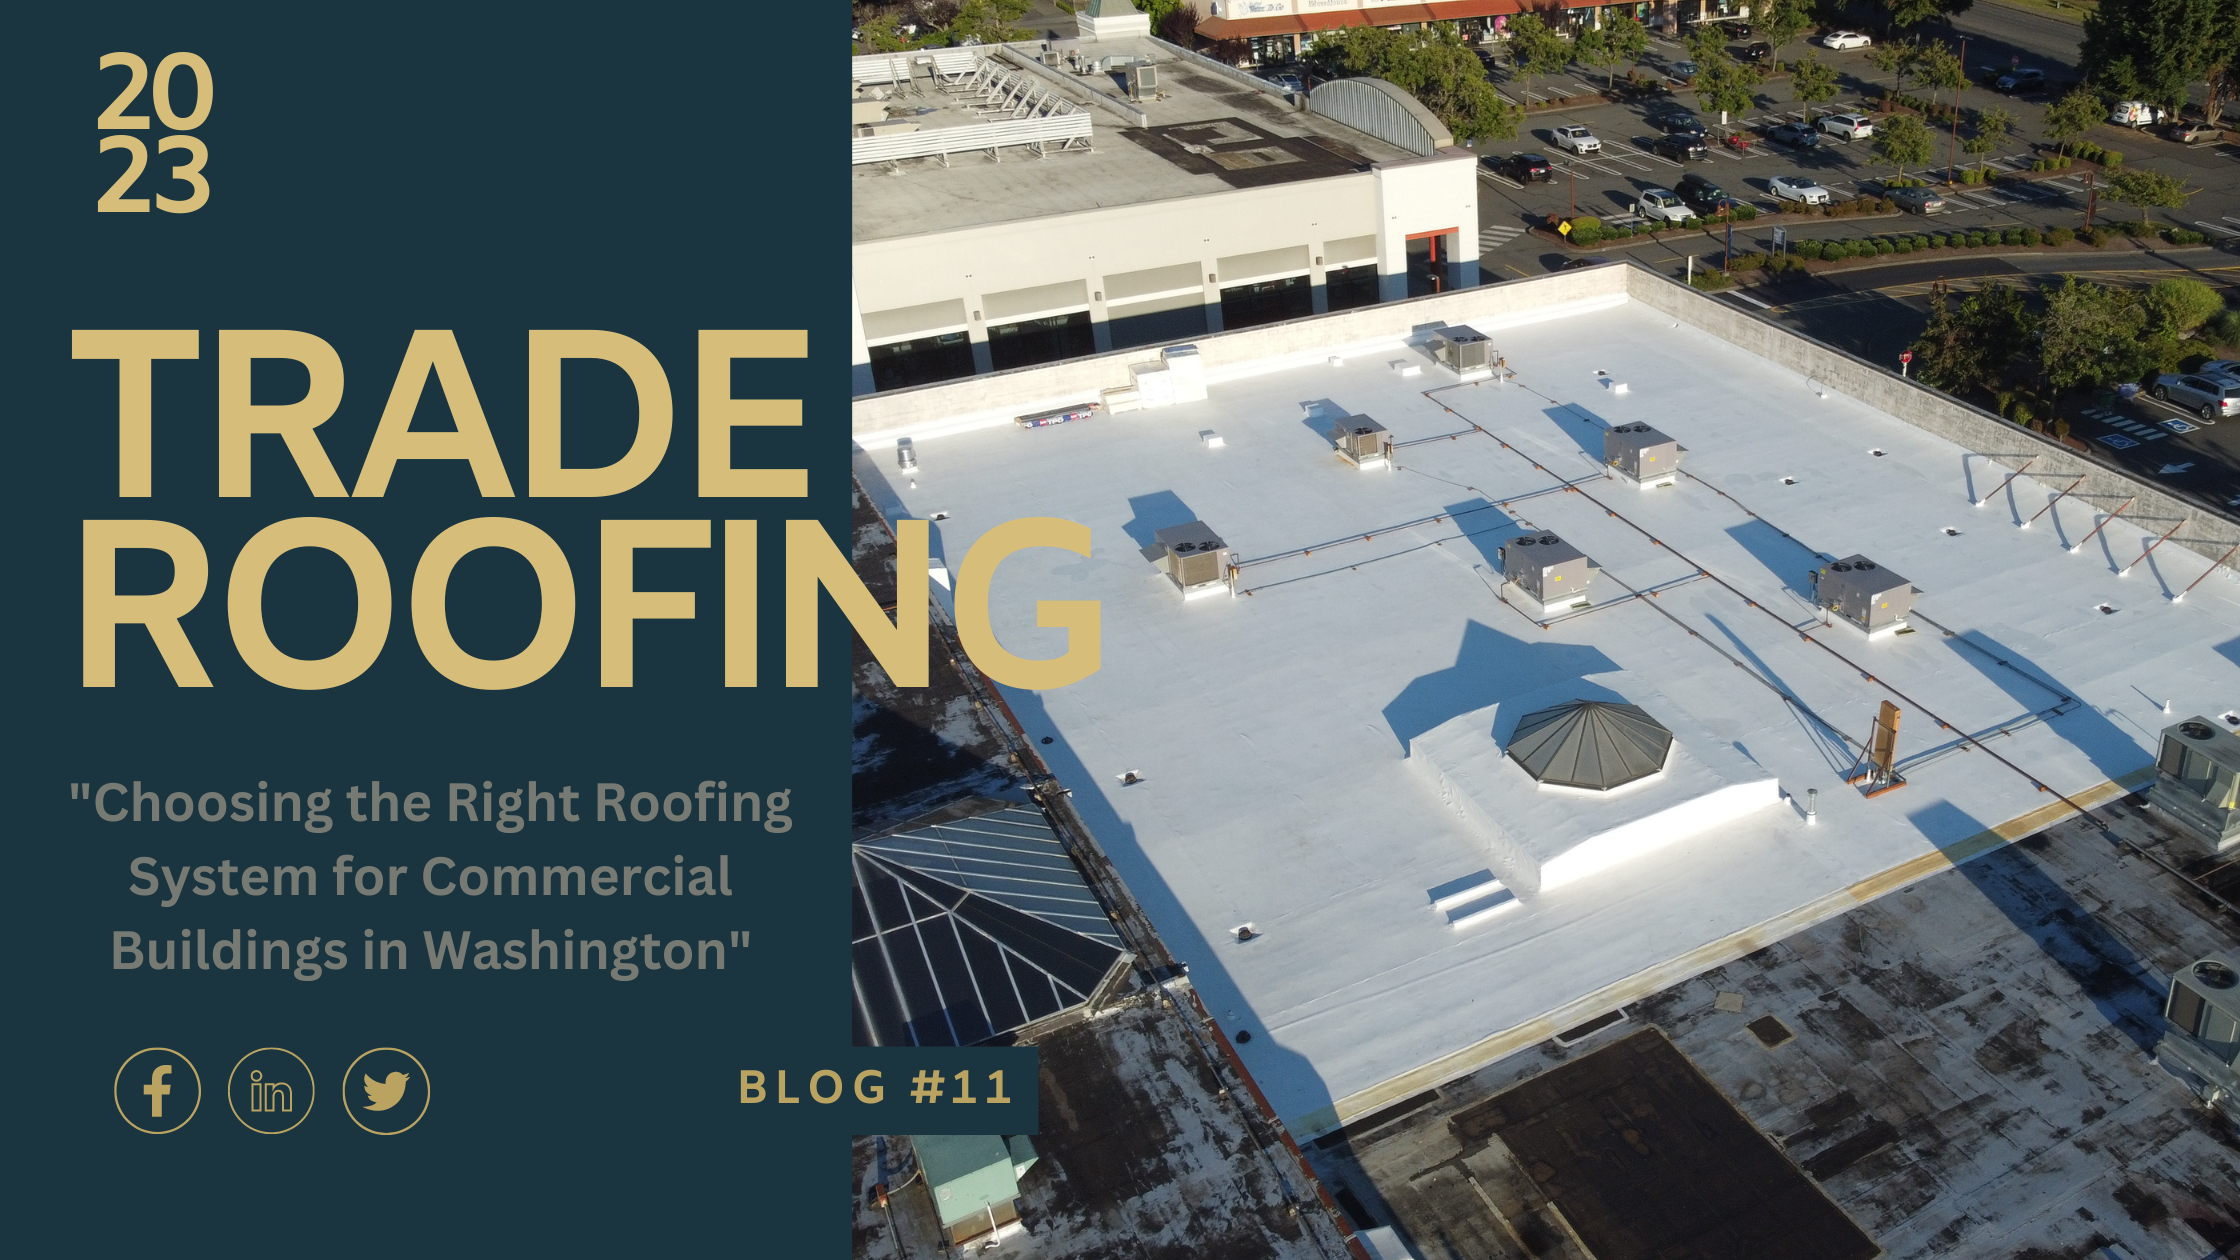 Choosing the Right Roofing System for Commercial Buildings in Washington